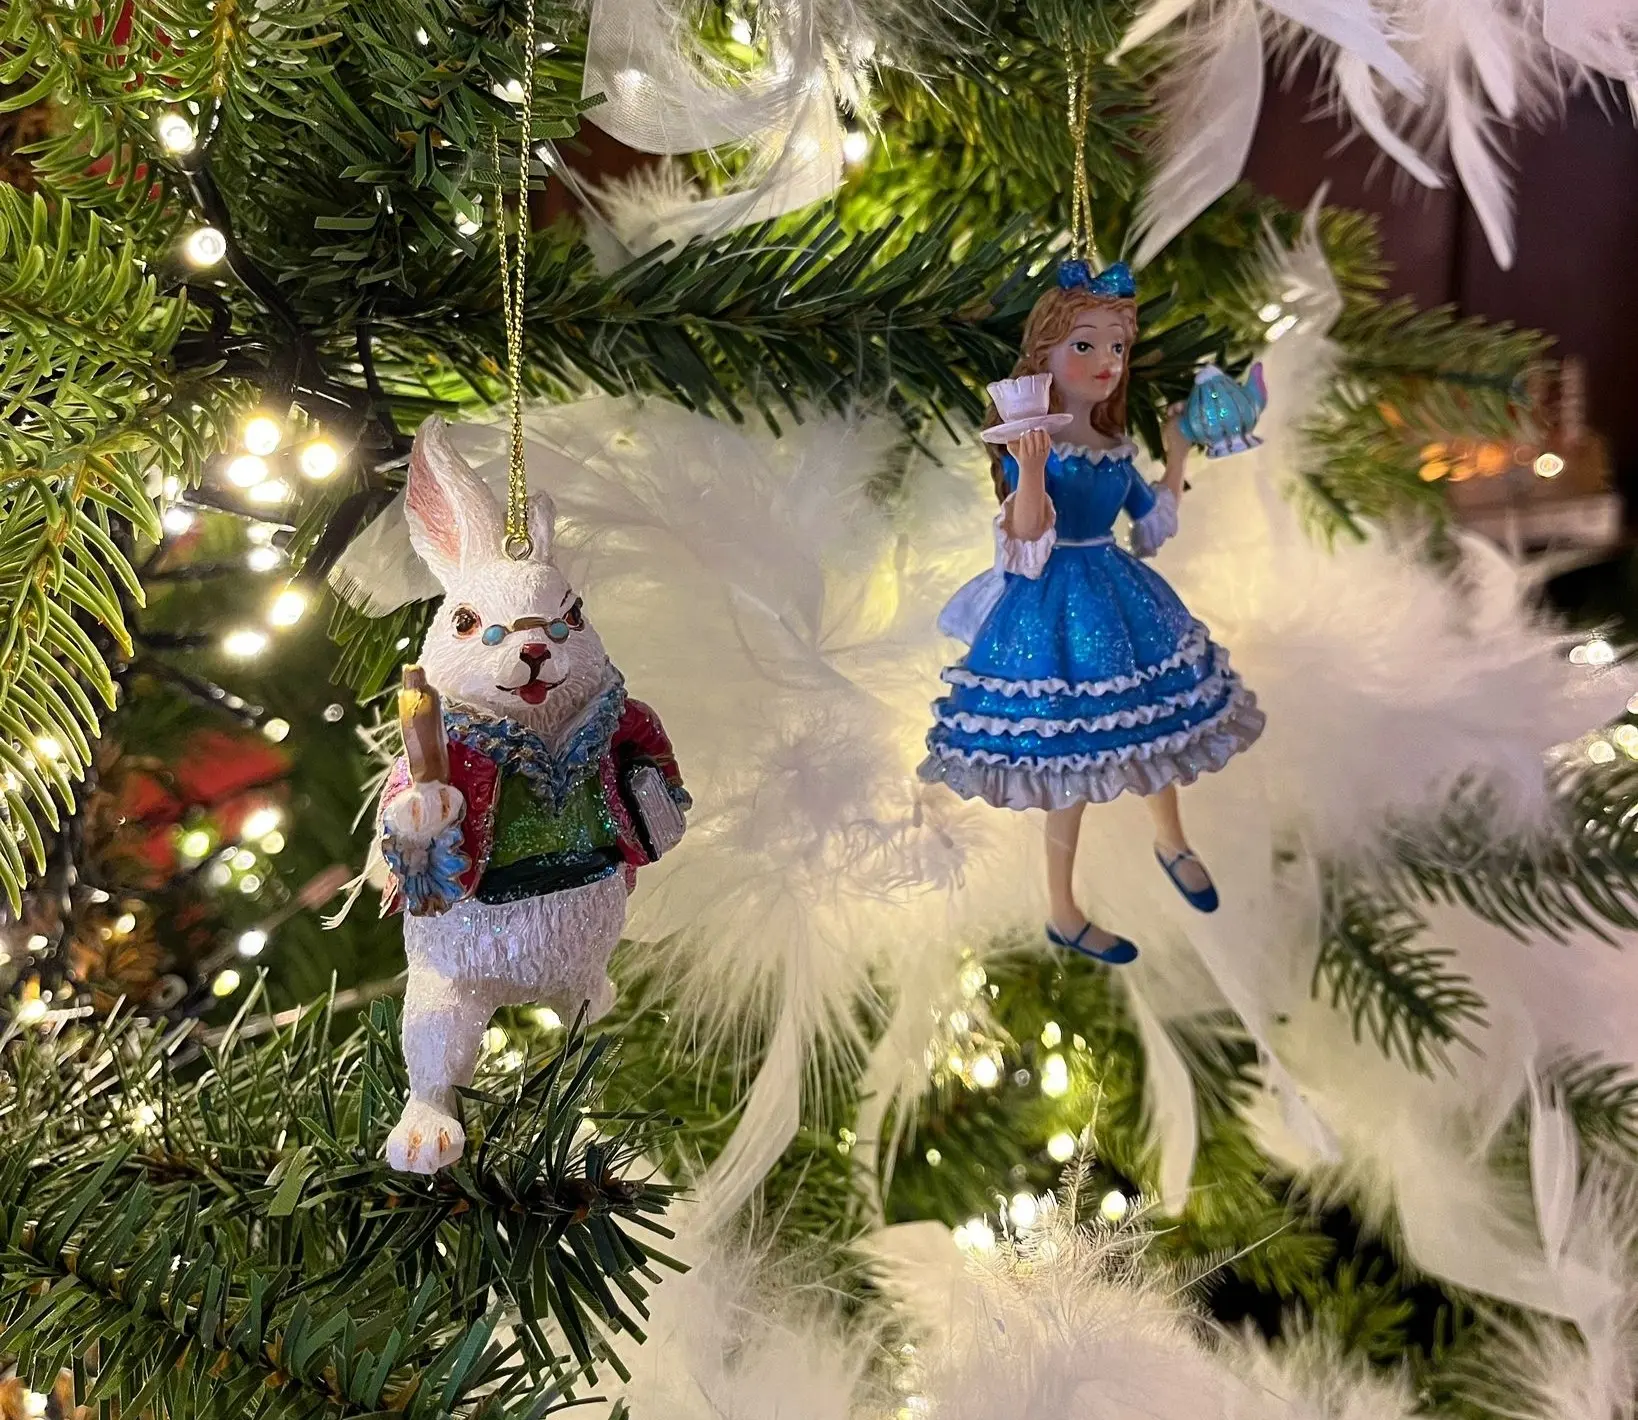 Storytime Character Themed Christmas Tree Decorations